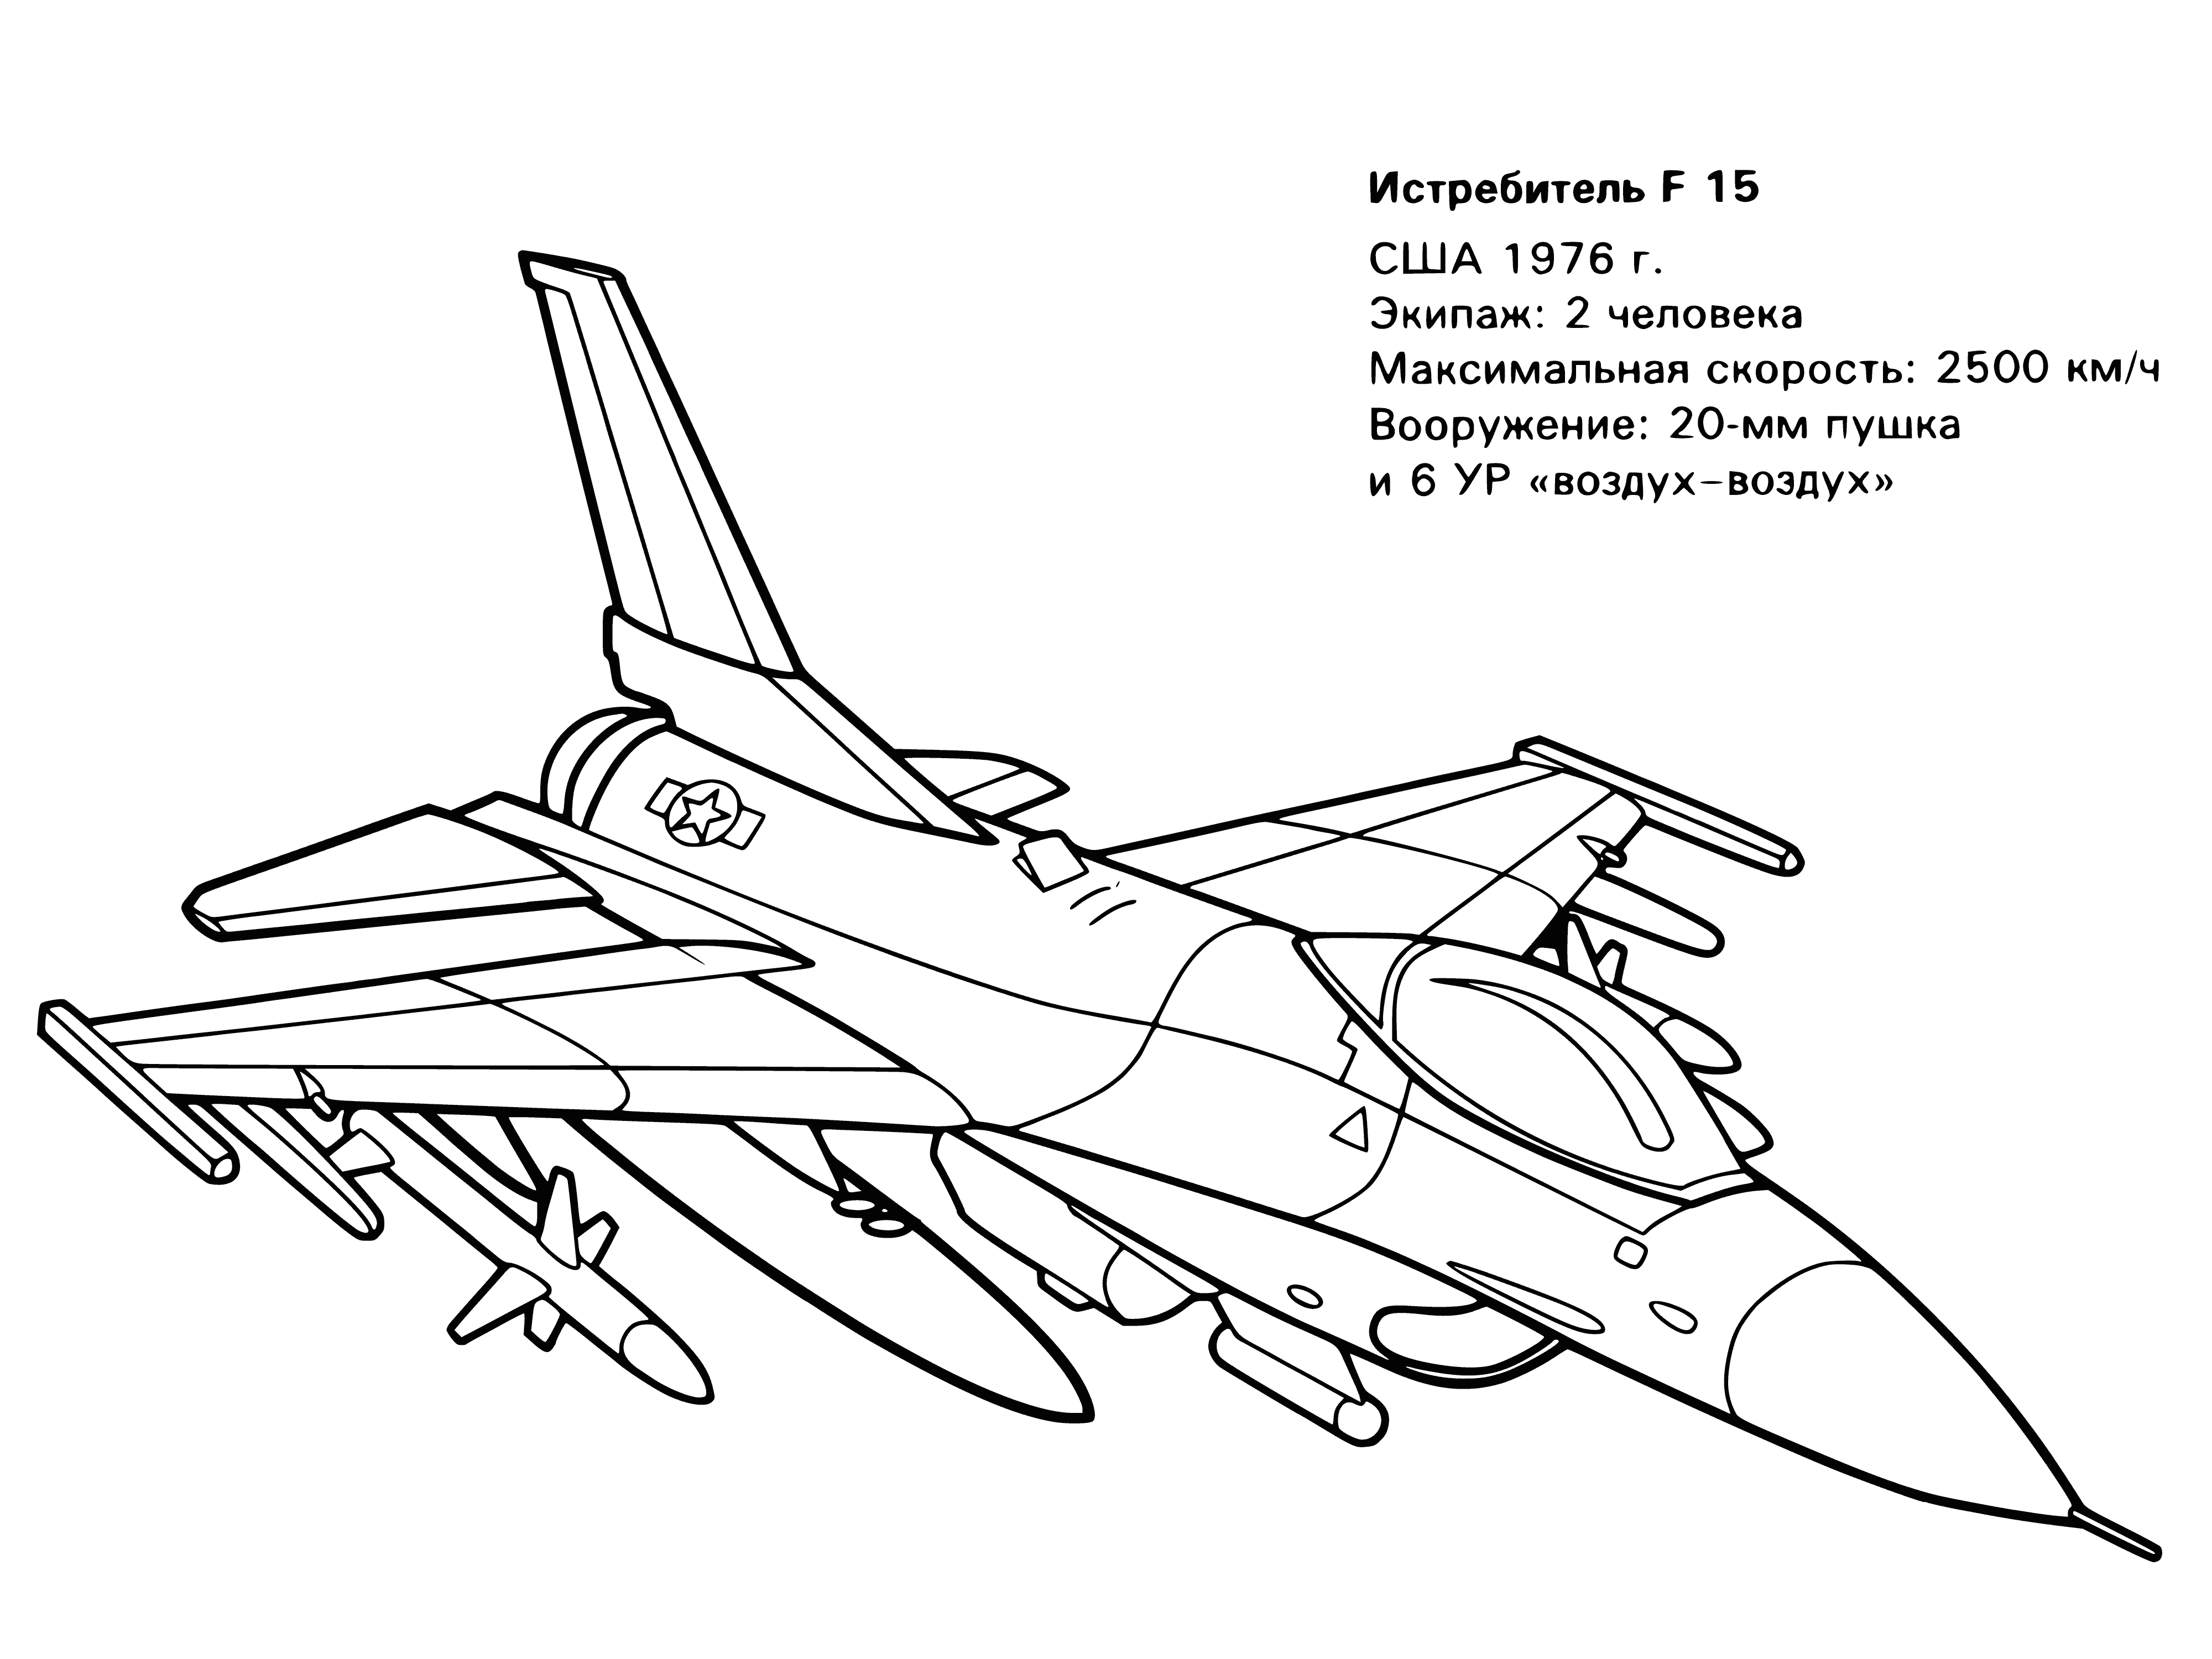 coloring page: Fighter with two engines, two seats, two wings. Blue w/yellow stripe, small back engine. #aviation